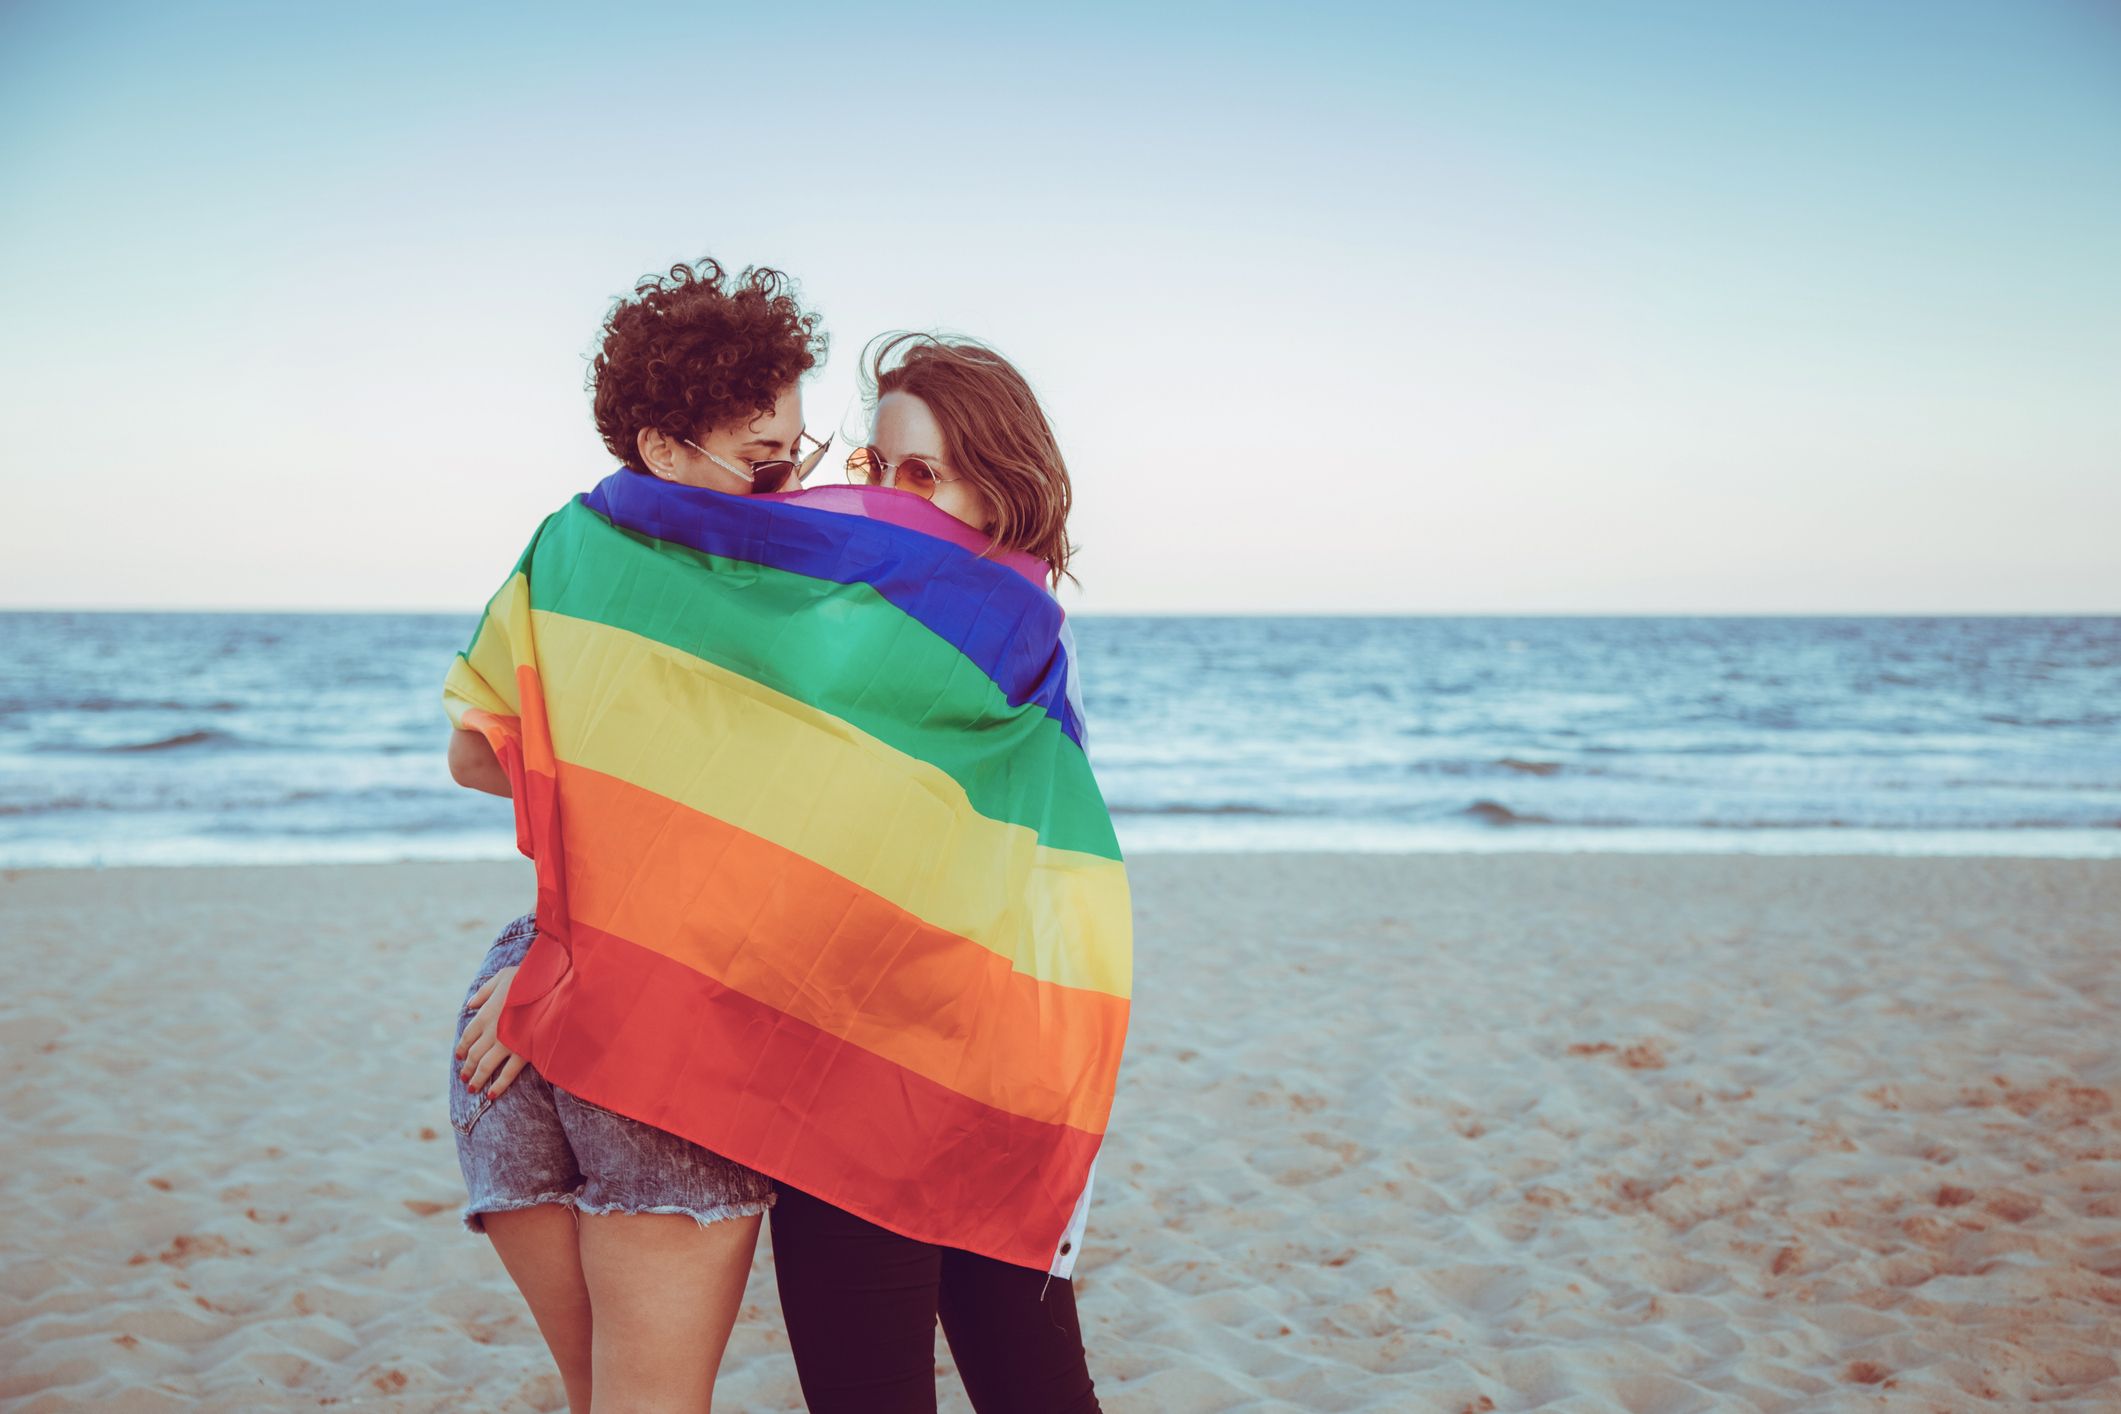 Nude Beach Crush - Am I Bisexual?' 10 Bisexuality Signs, According To Experts